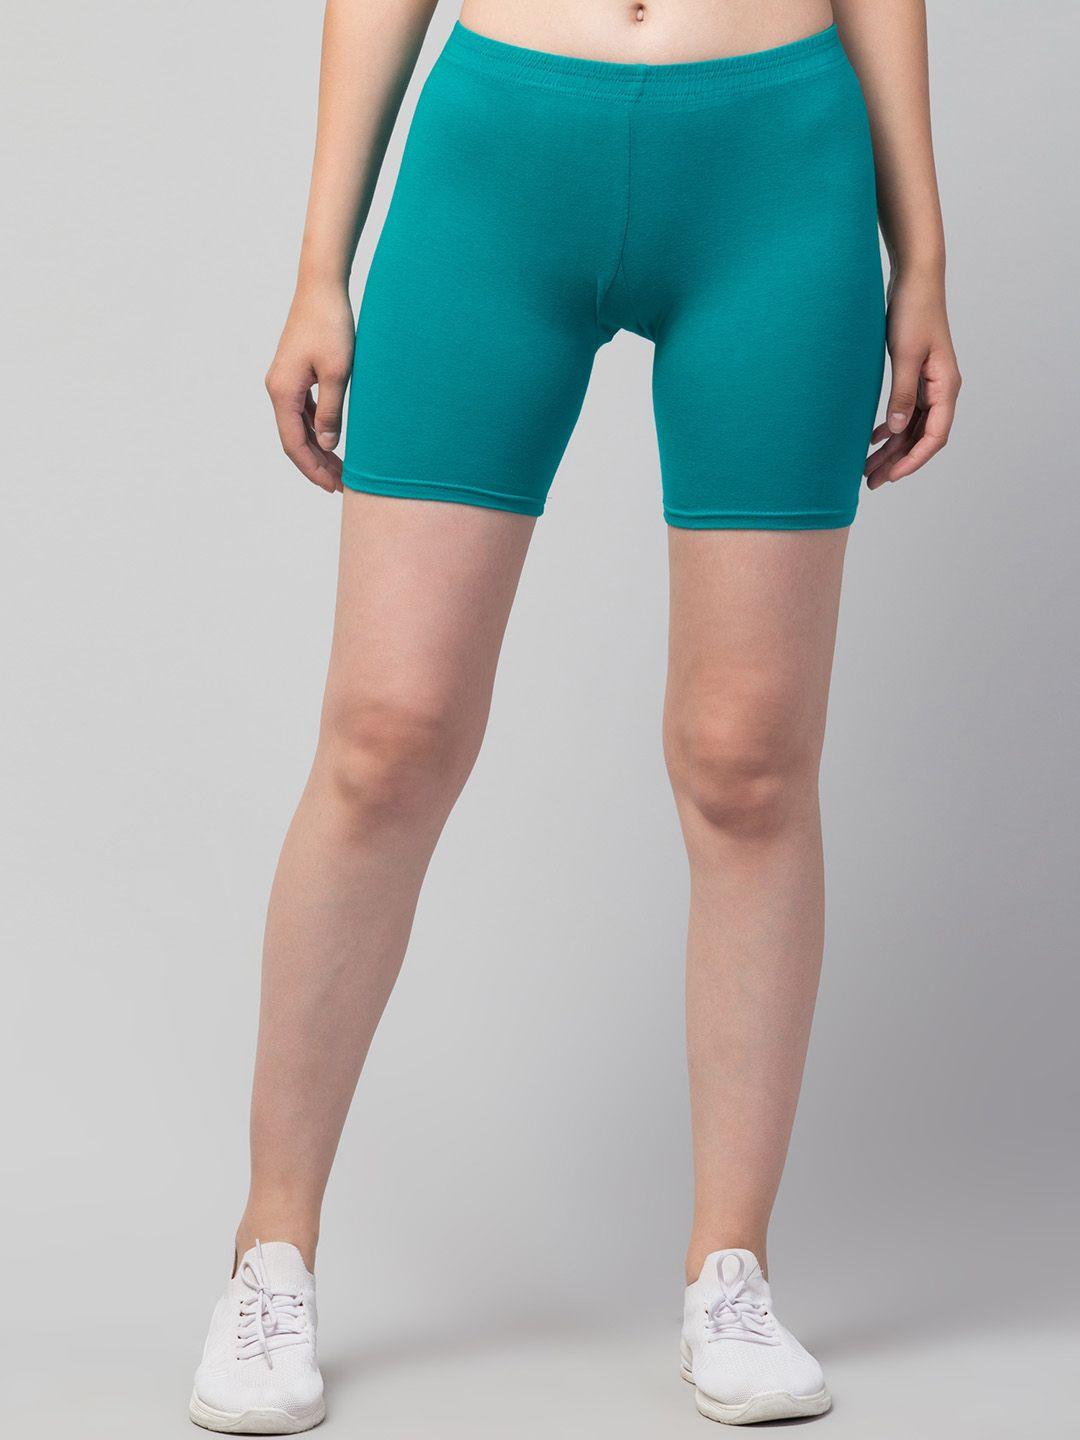 apraa & parma women skinny fit mid-rise pure cotton cycling sports shorts